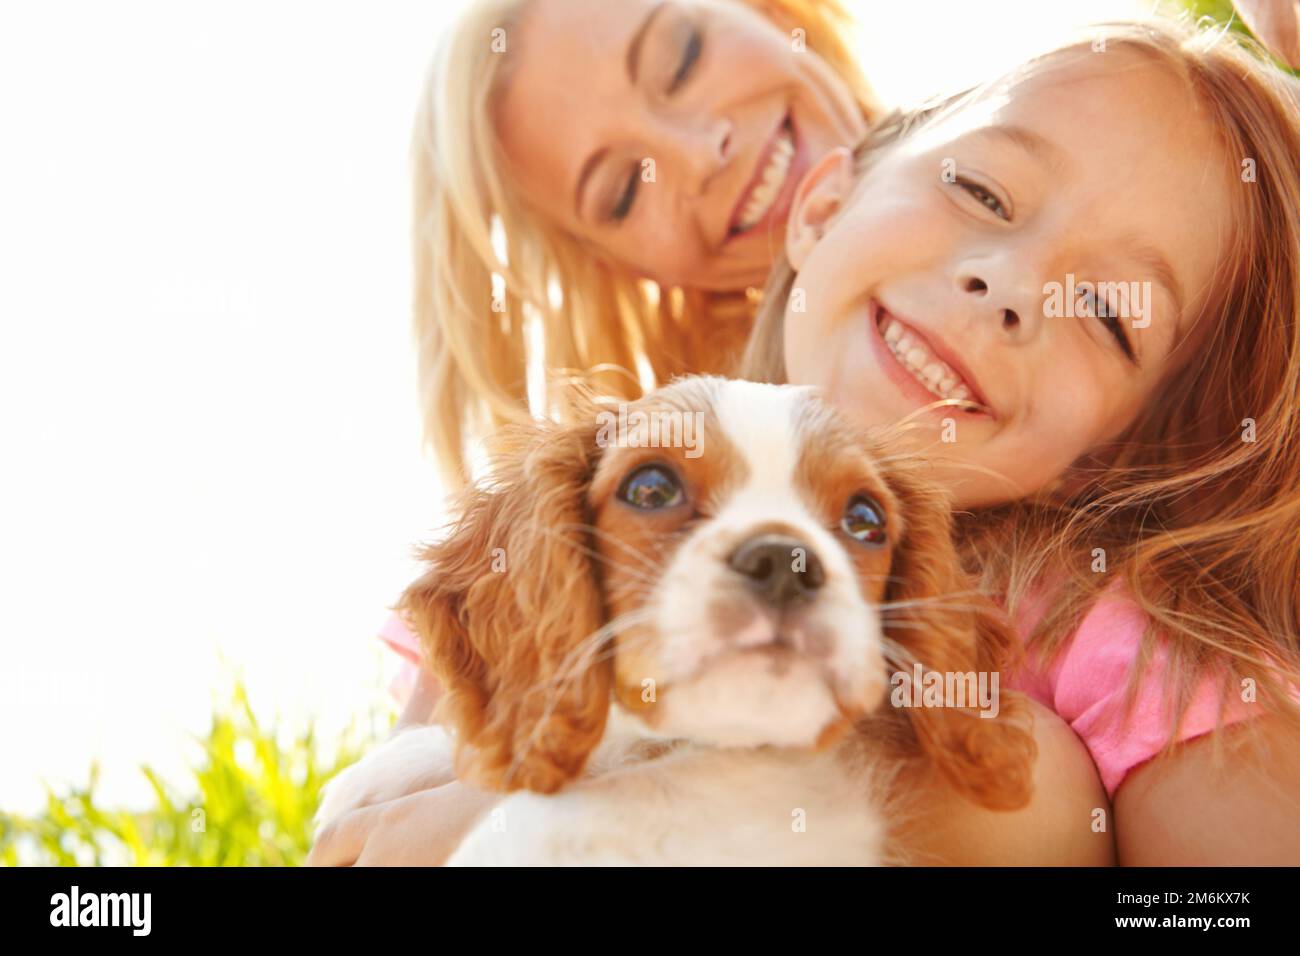 New addition to the family. Portrait of a mother, daughter and puppy enjoying a sunny day together. Stock Photo